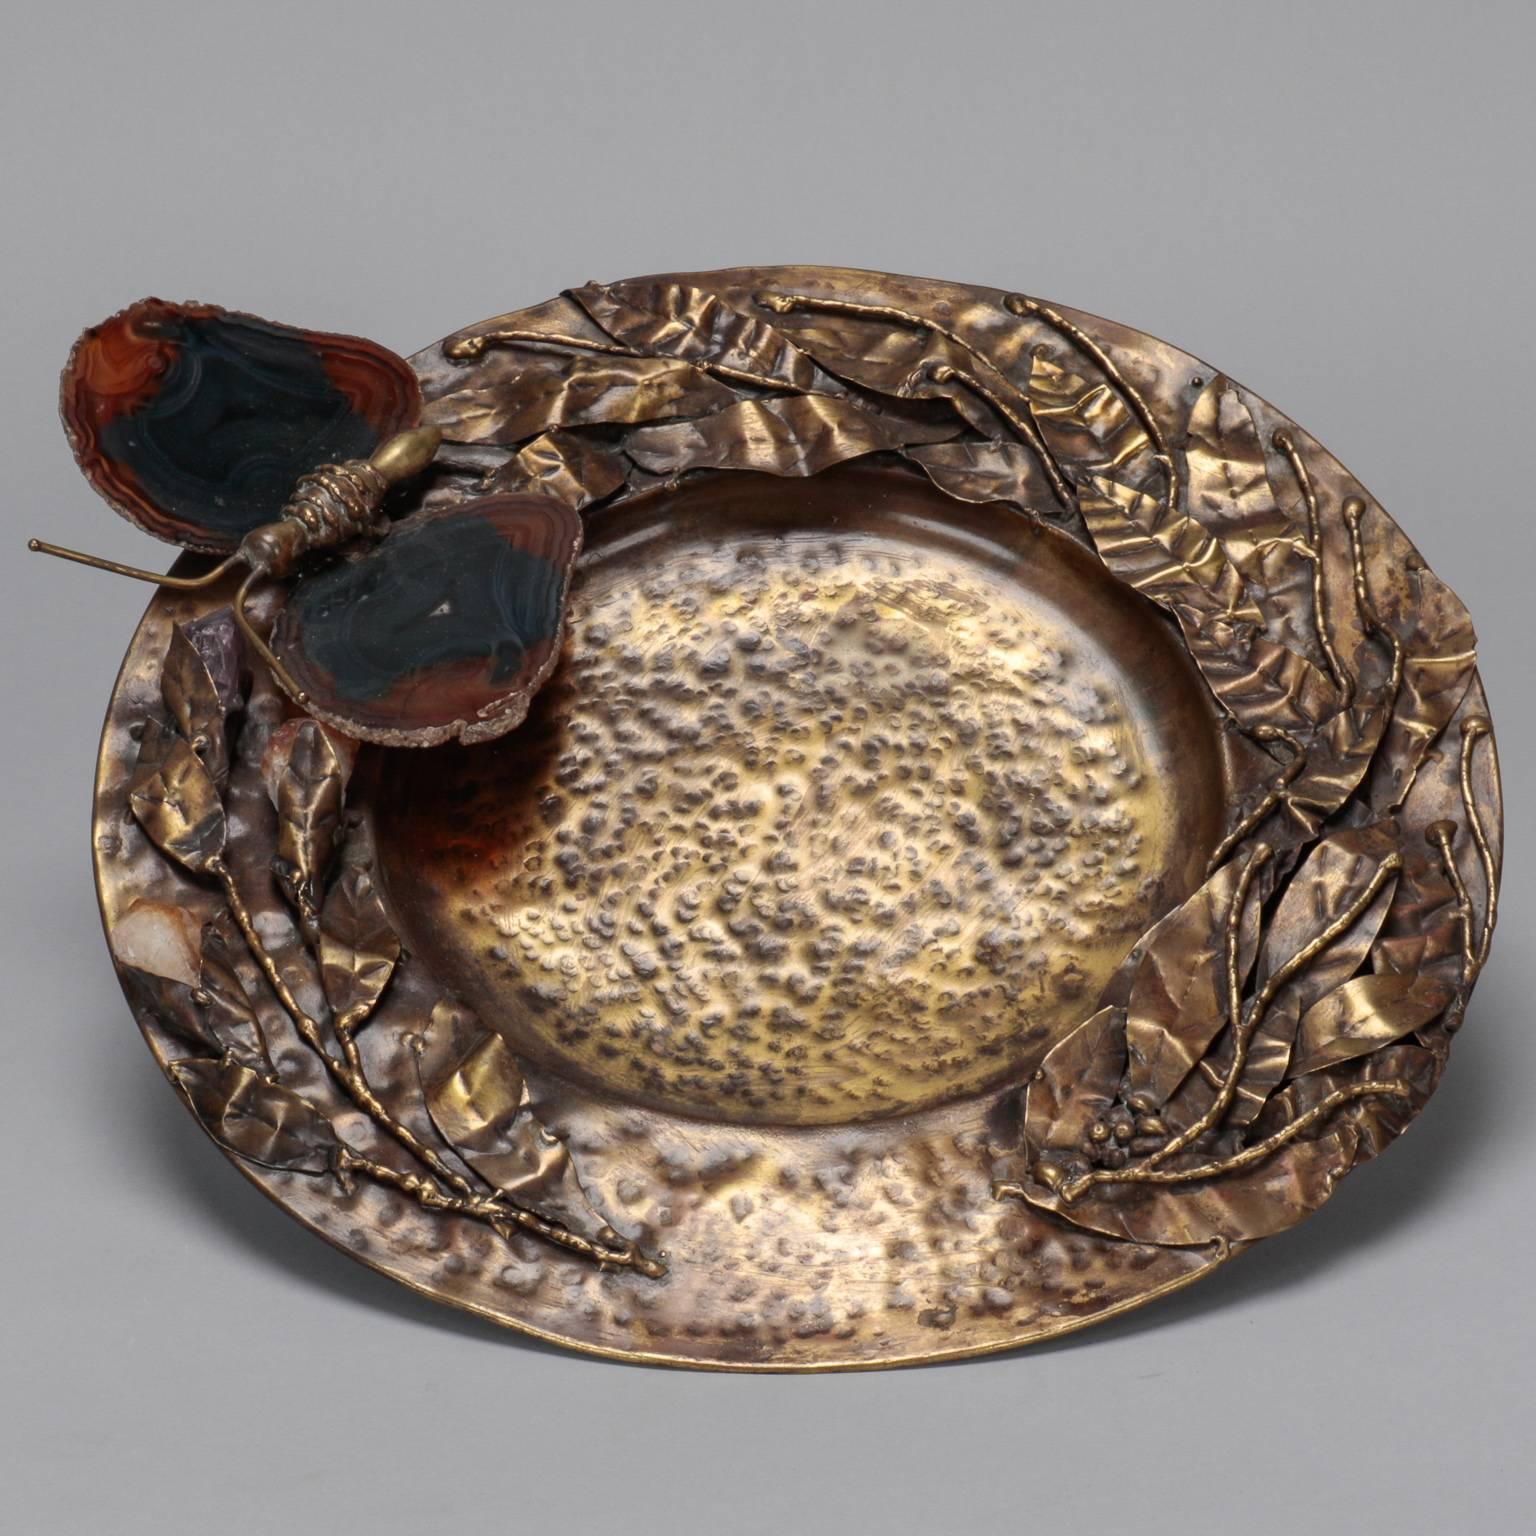 Found in Italy, this Mid-Century decorative plate dates from the 1970s. Plate is 13” diameter and has hammered texture with sculpted leaves and blooms and a large sculpted butterfly on the rim with slices of tortoiseshell colored agate wings and a